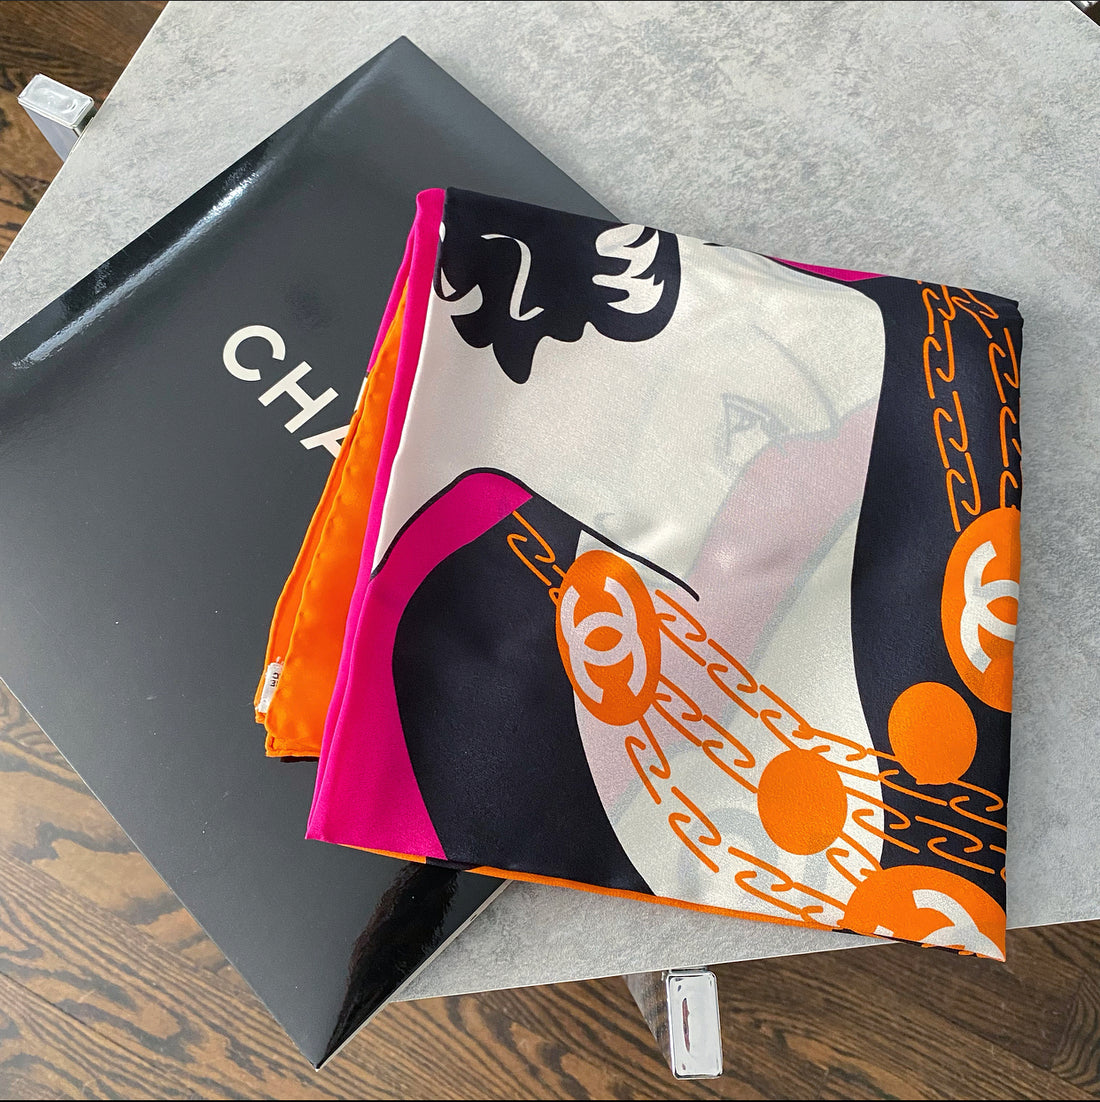 Chanel Limited Edition Just a Drop of No. 5 Silk Scarf